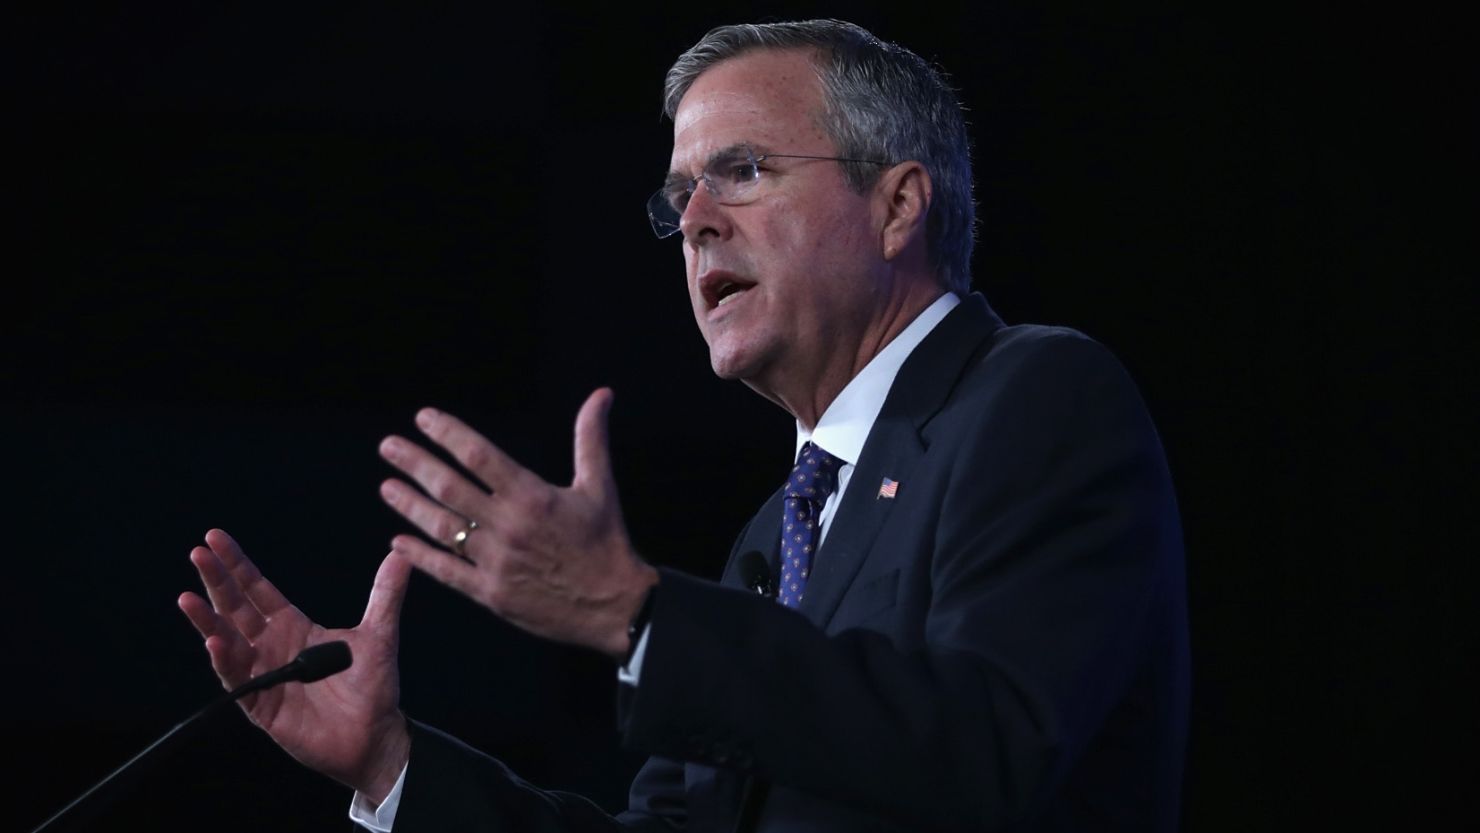 Republican presidential hopeful and former Florida Governor Jeb Bush speaks during the 2015 Southern Republican Leadership Conference May 22, 2015 in Oklahoma City, Oklahoma.